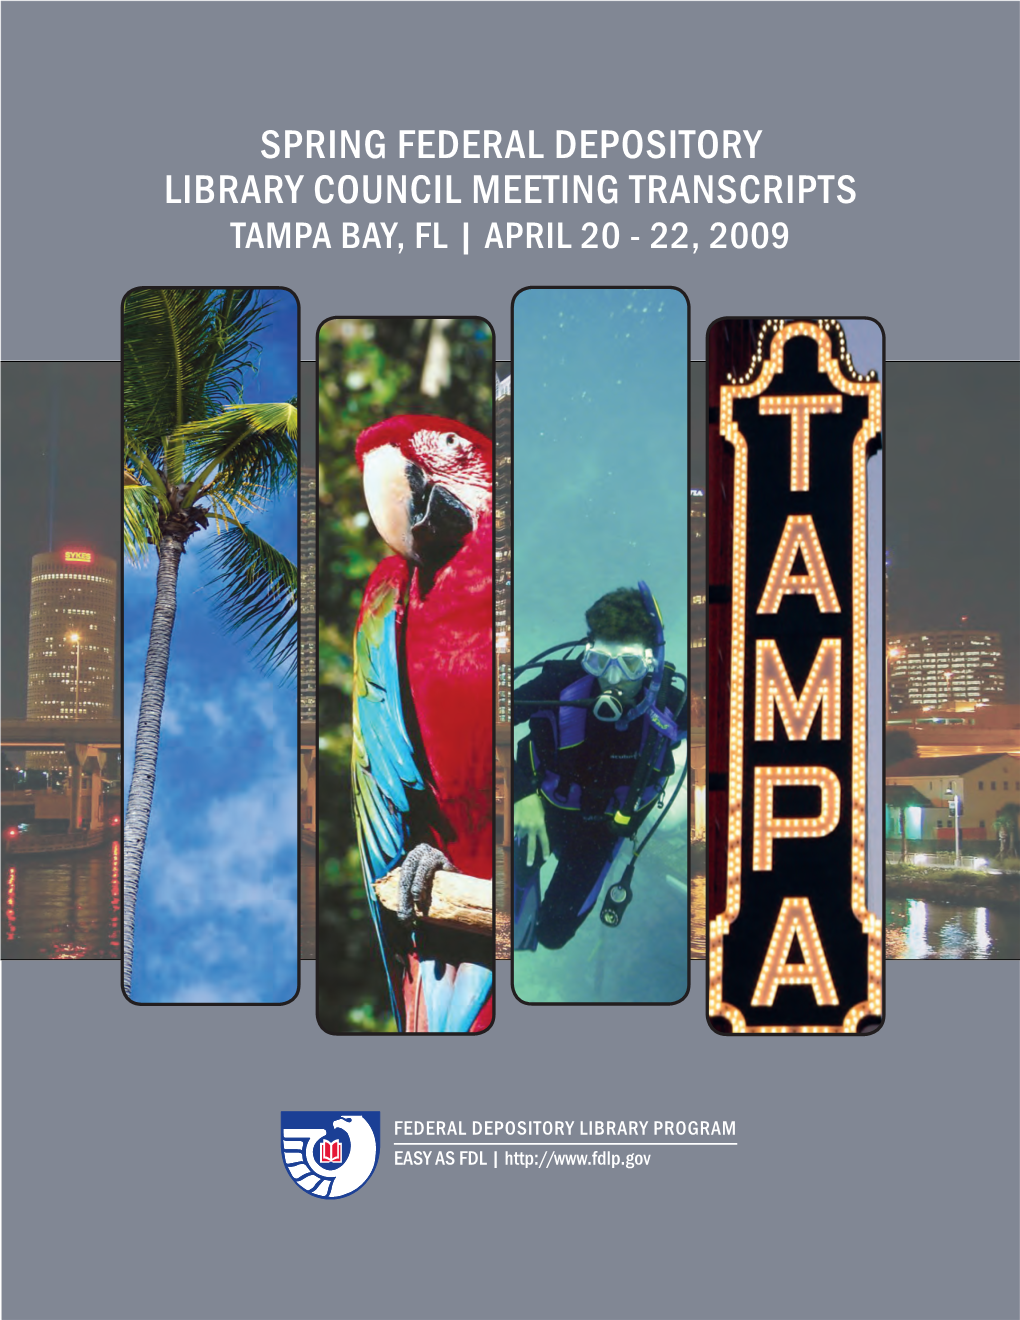 Spring Federal Depository Library Council Meeting Transcripts Tampa Bay, Fl | April 20 - 22, 2009